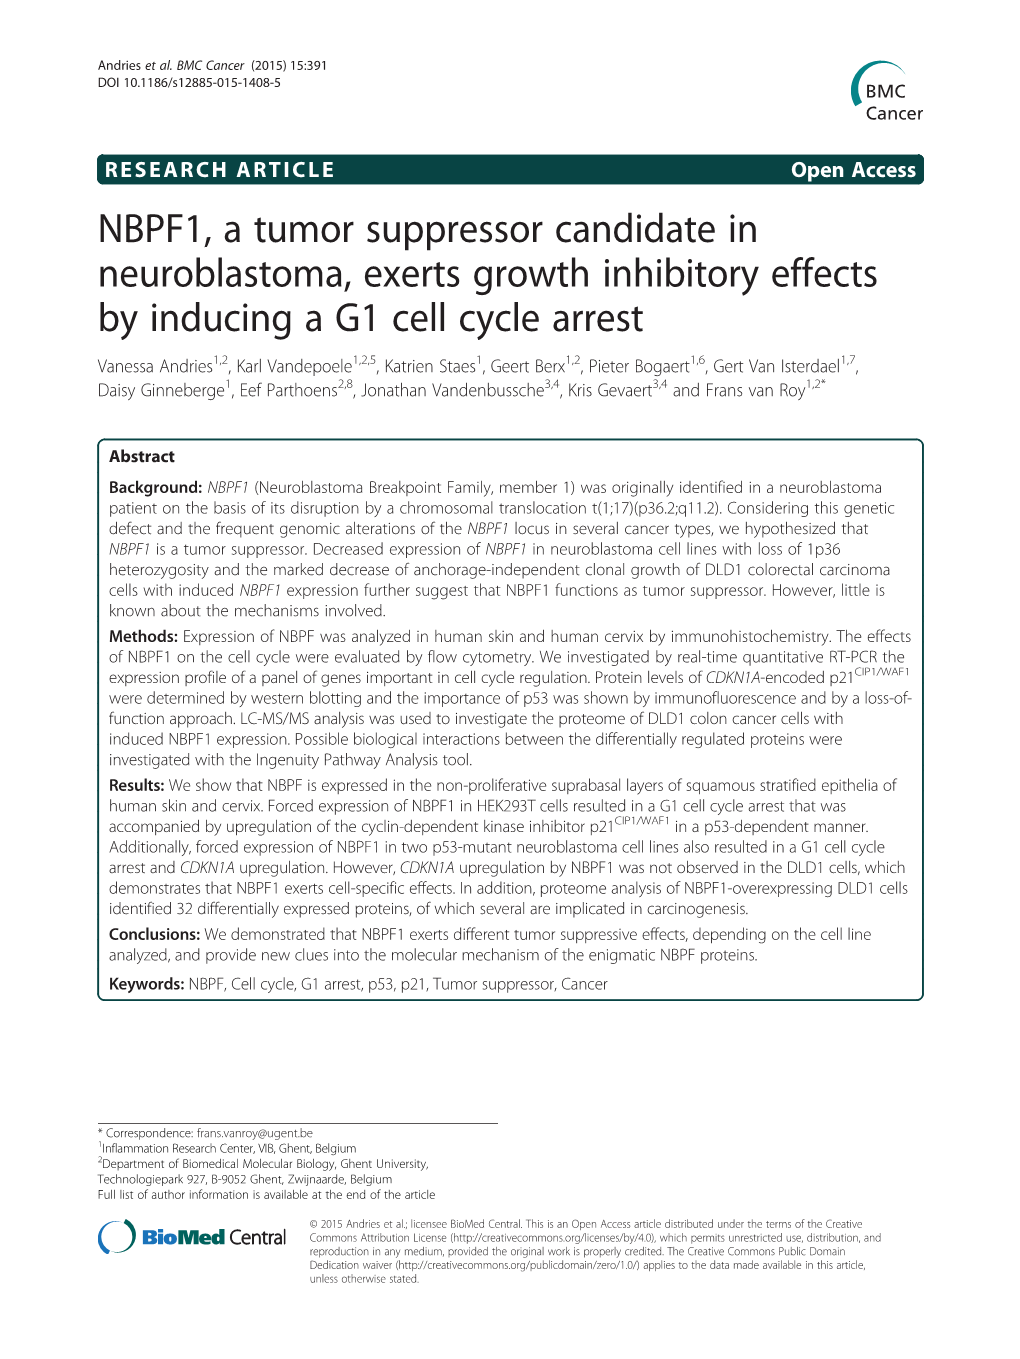 NBPF1, a Tumor Suppressor Candidate in Neuroblastoma, Exerts Growth